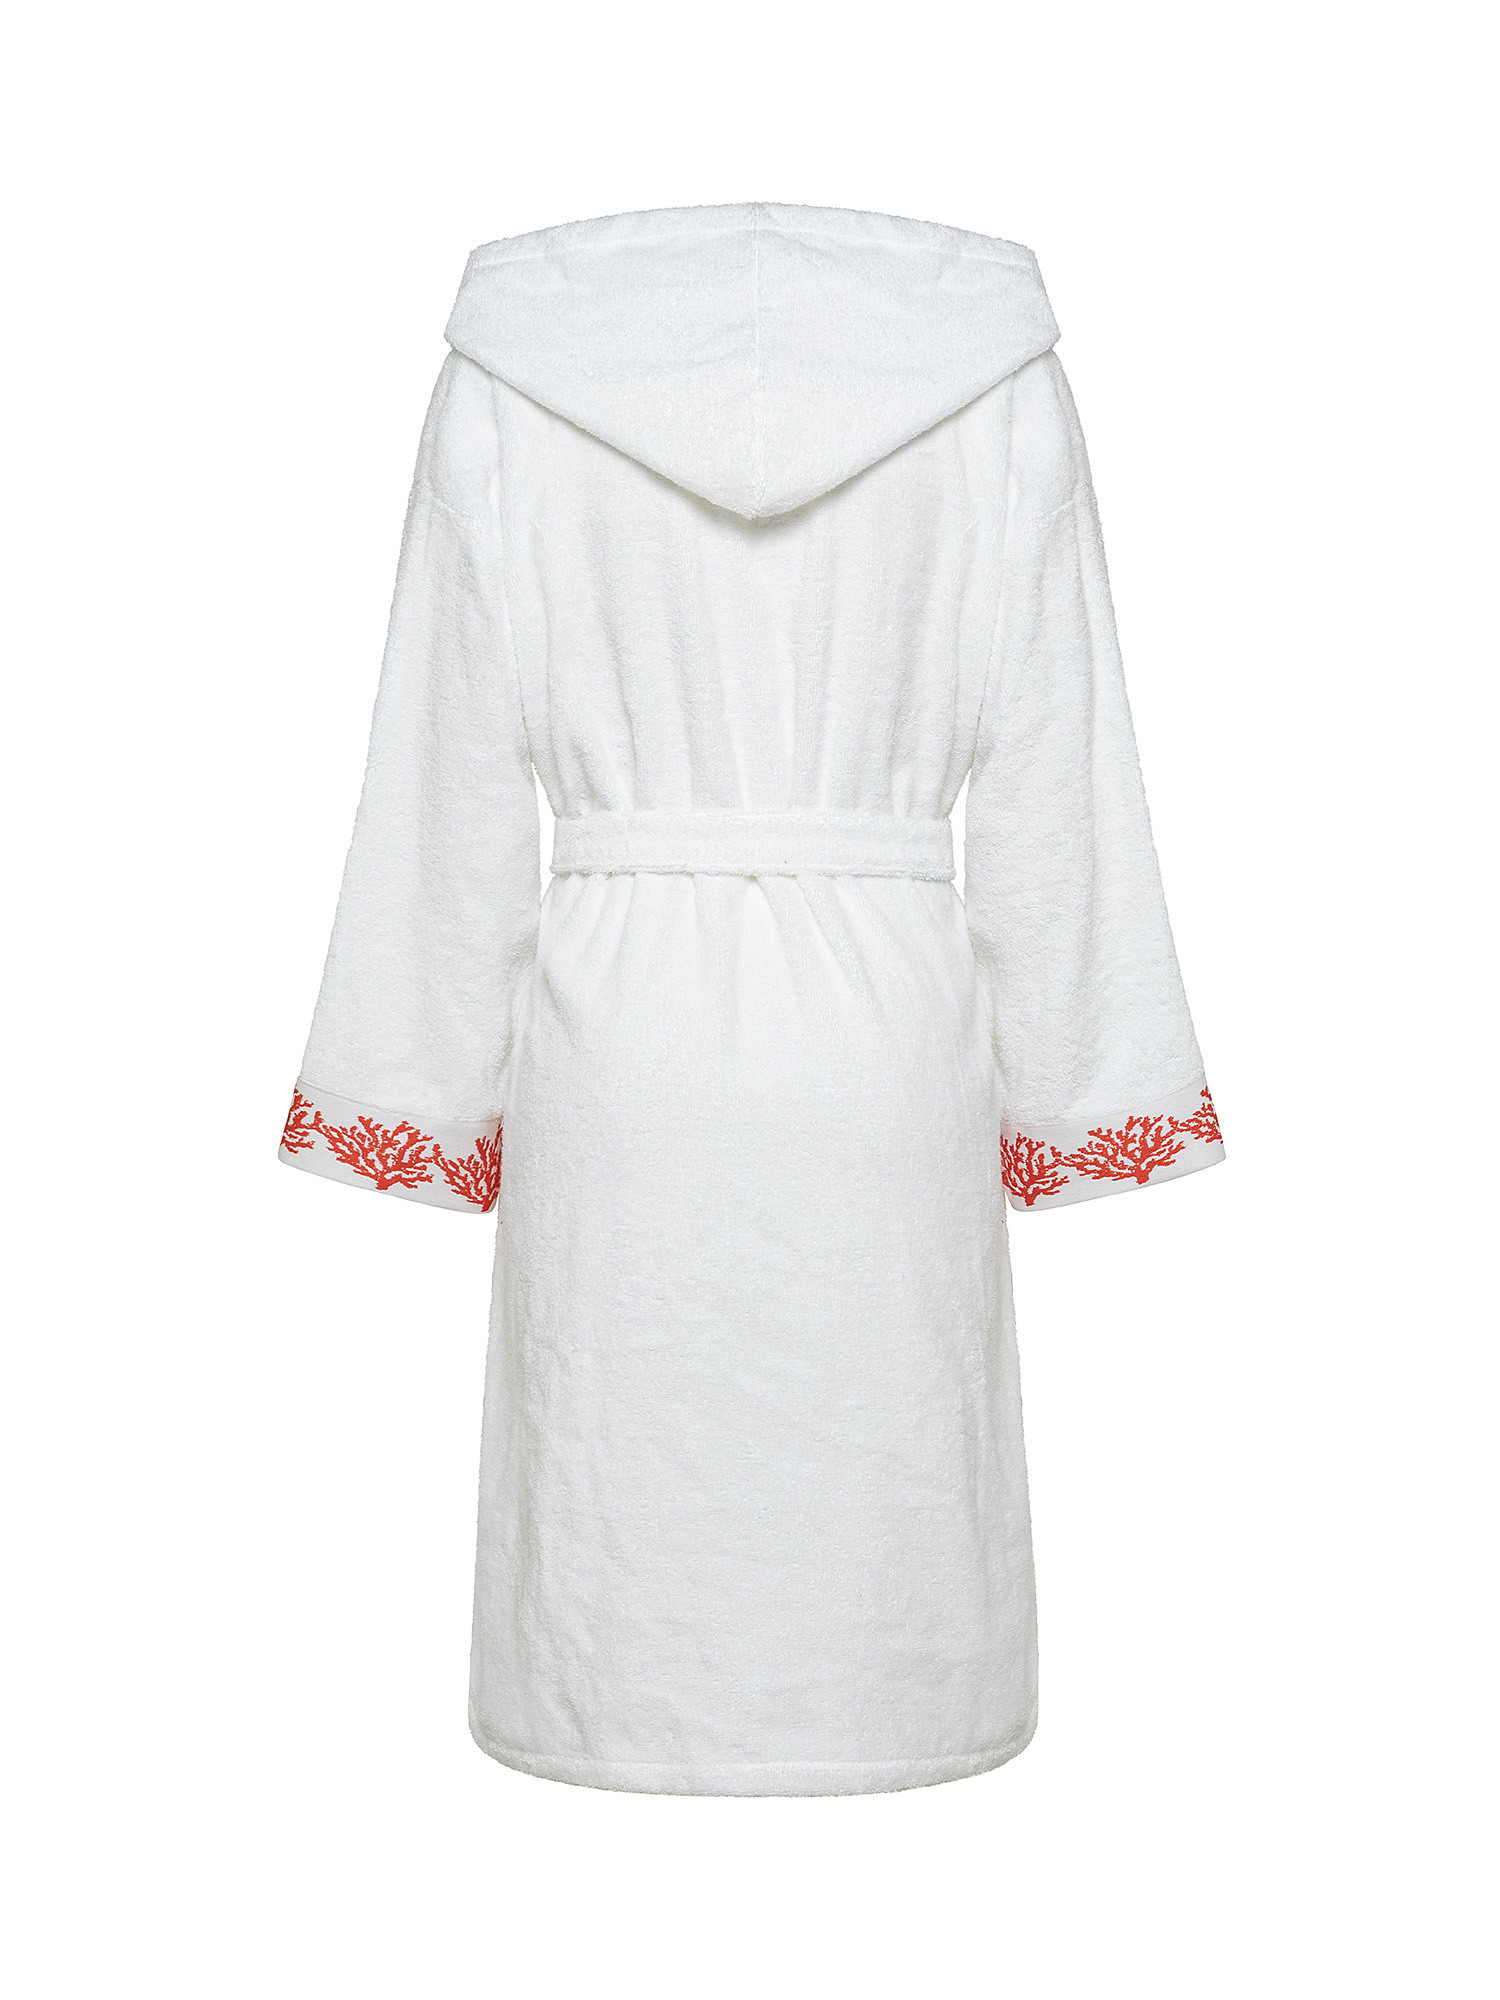 Terry cotton bathrobe with coral embroidery, White, large image number 1